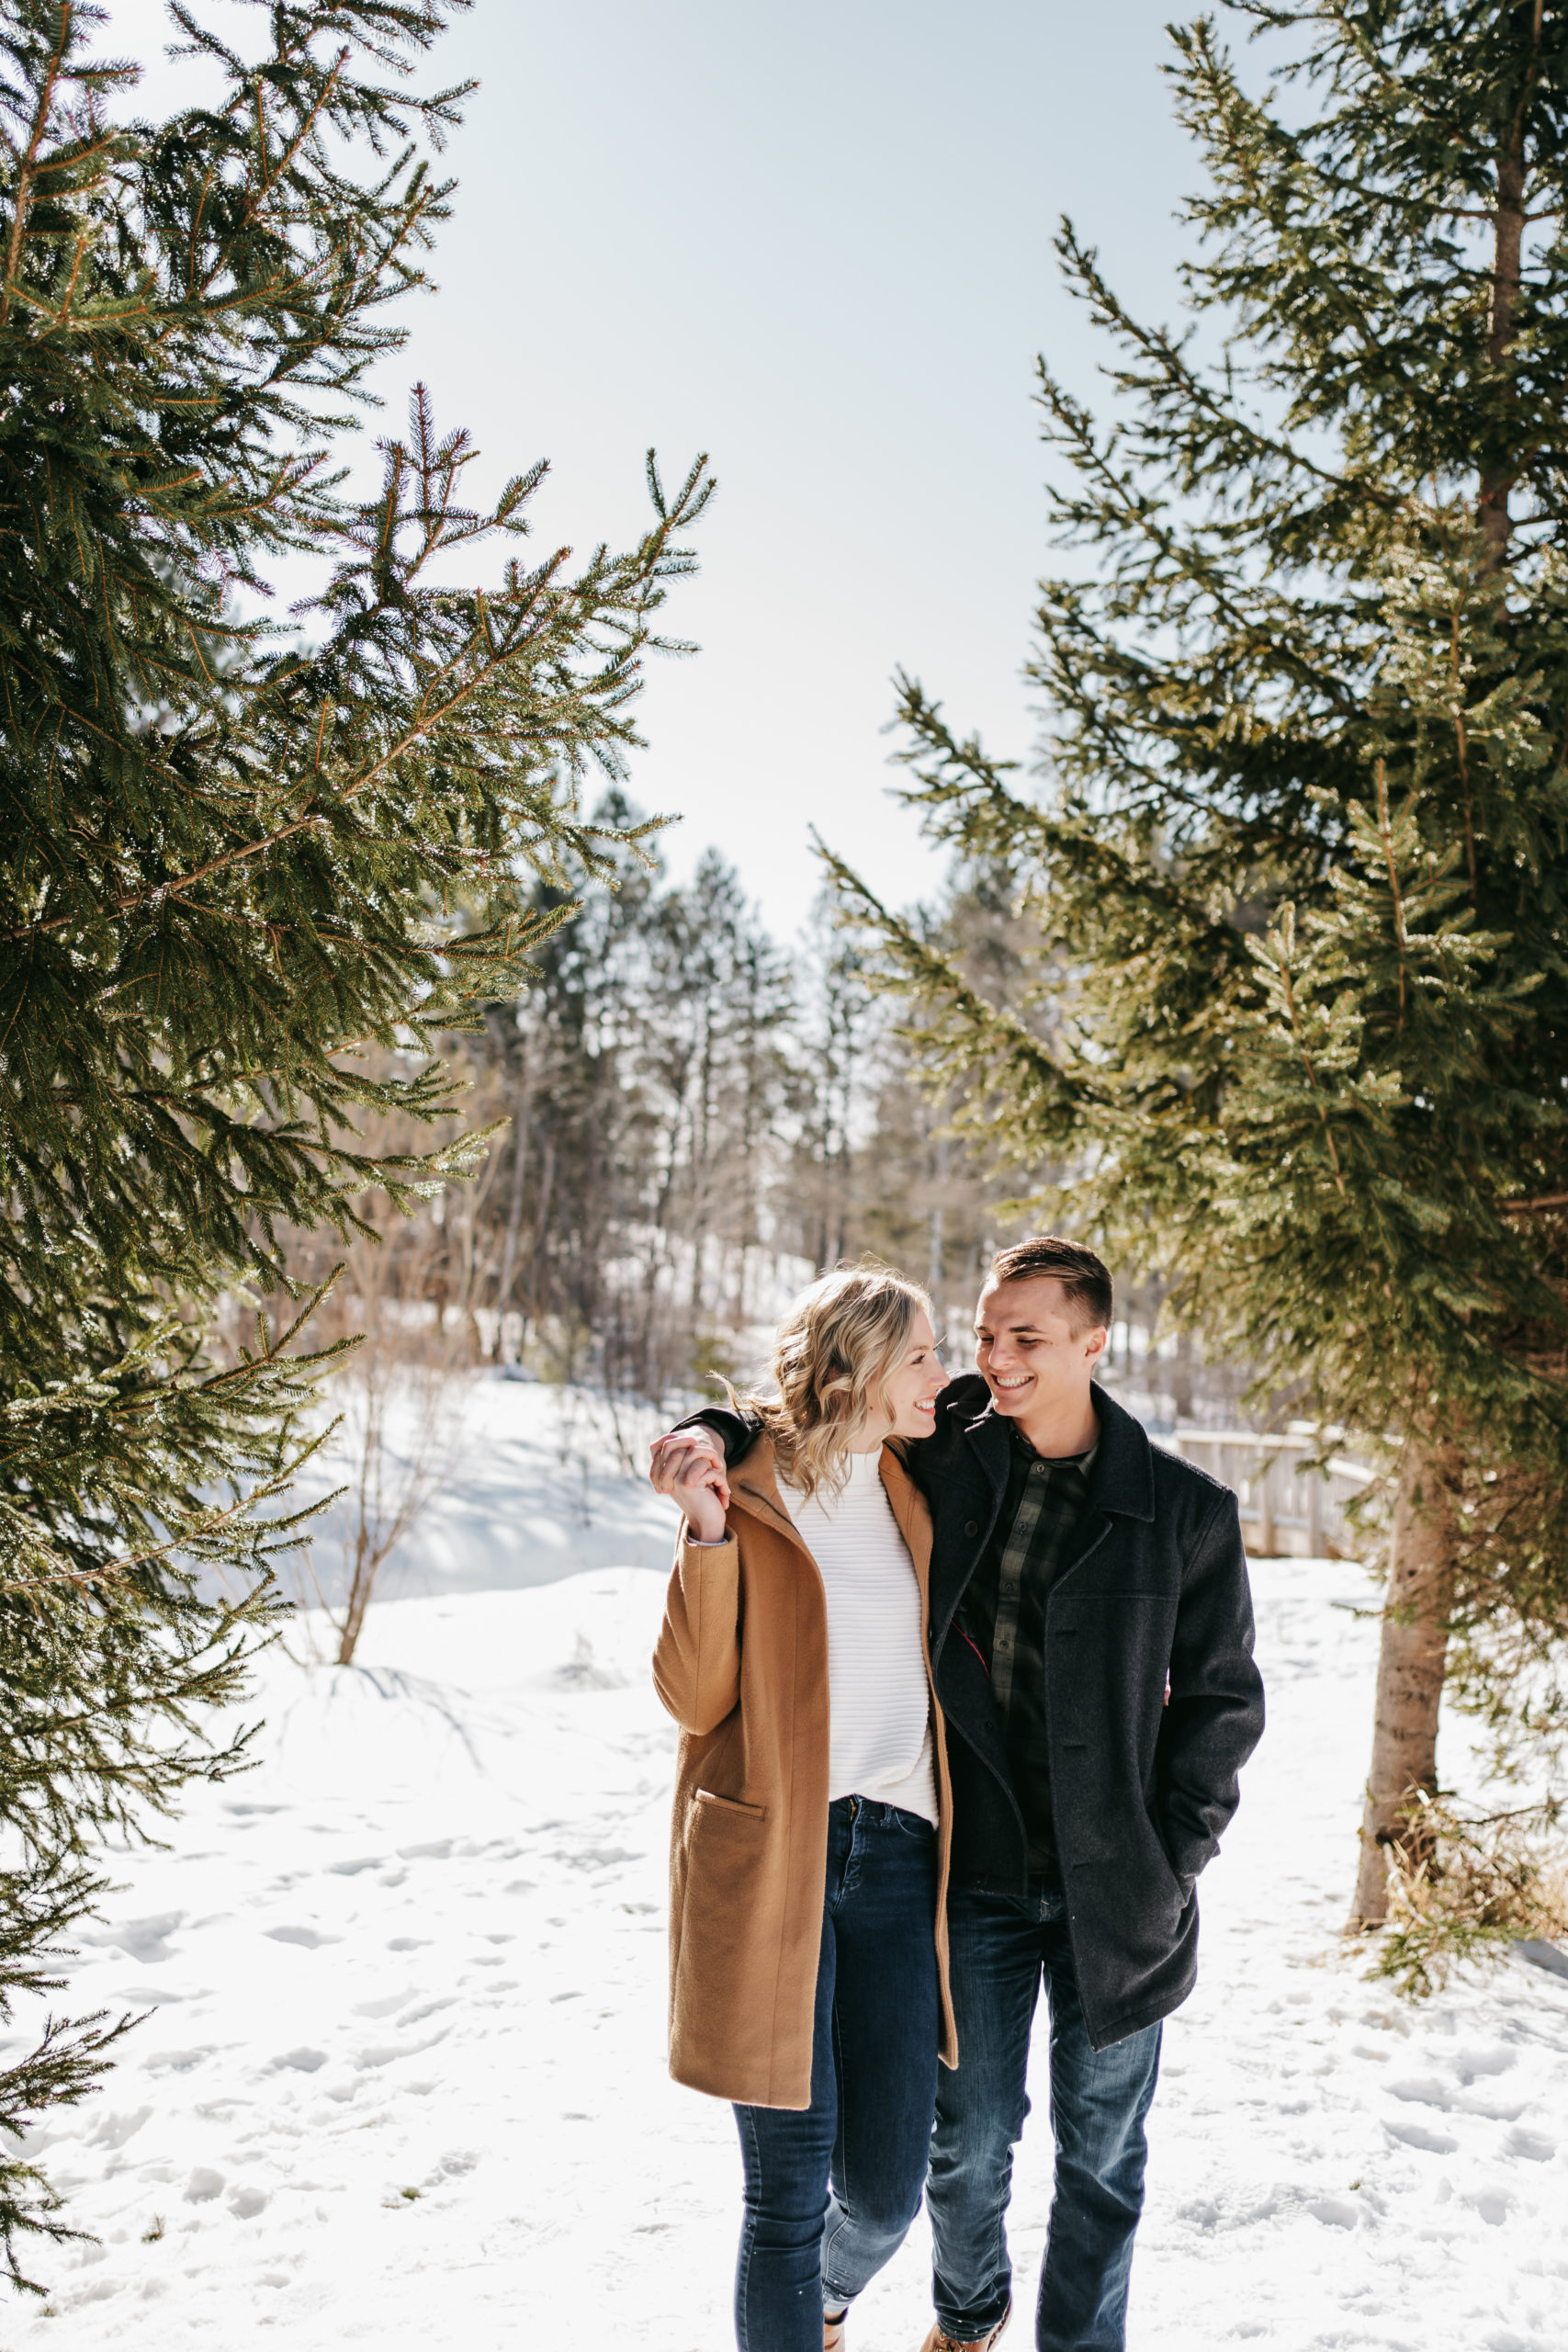 An engaged couple laughs in front of some pine trees in Northern Minnesota during their engagement session.